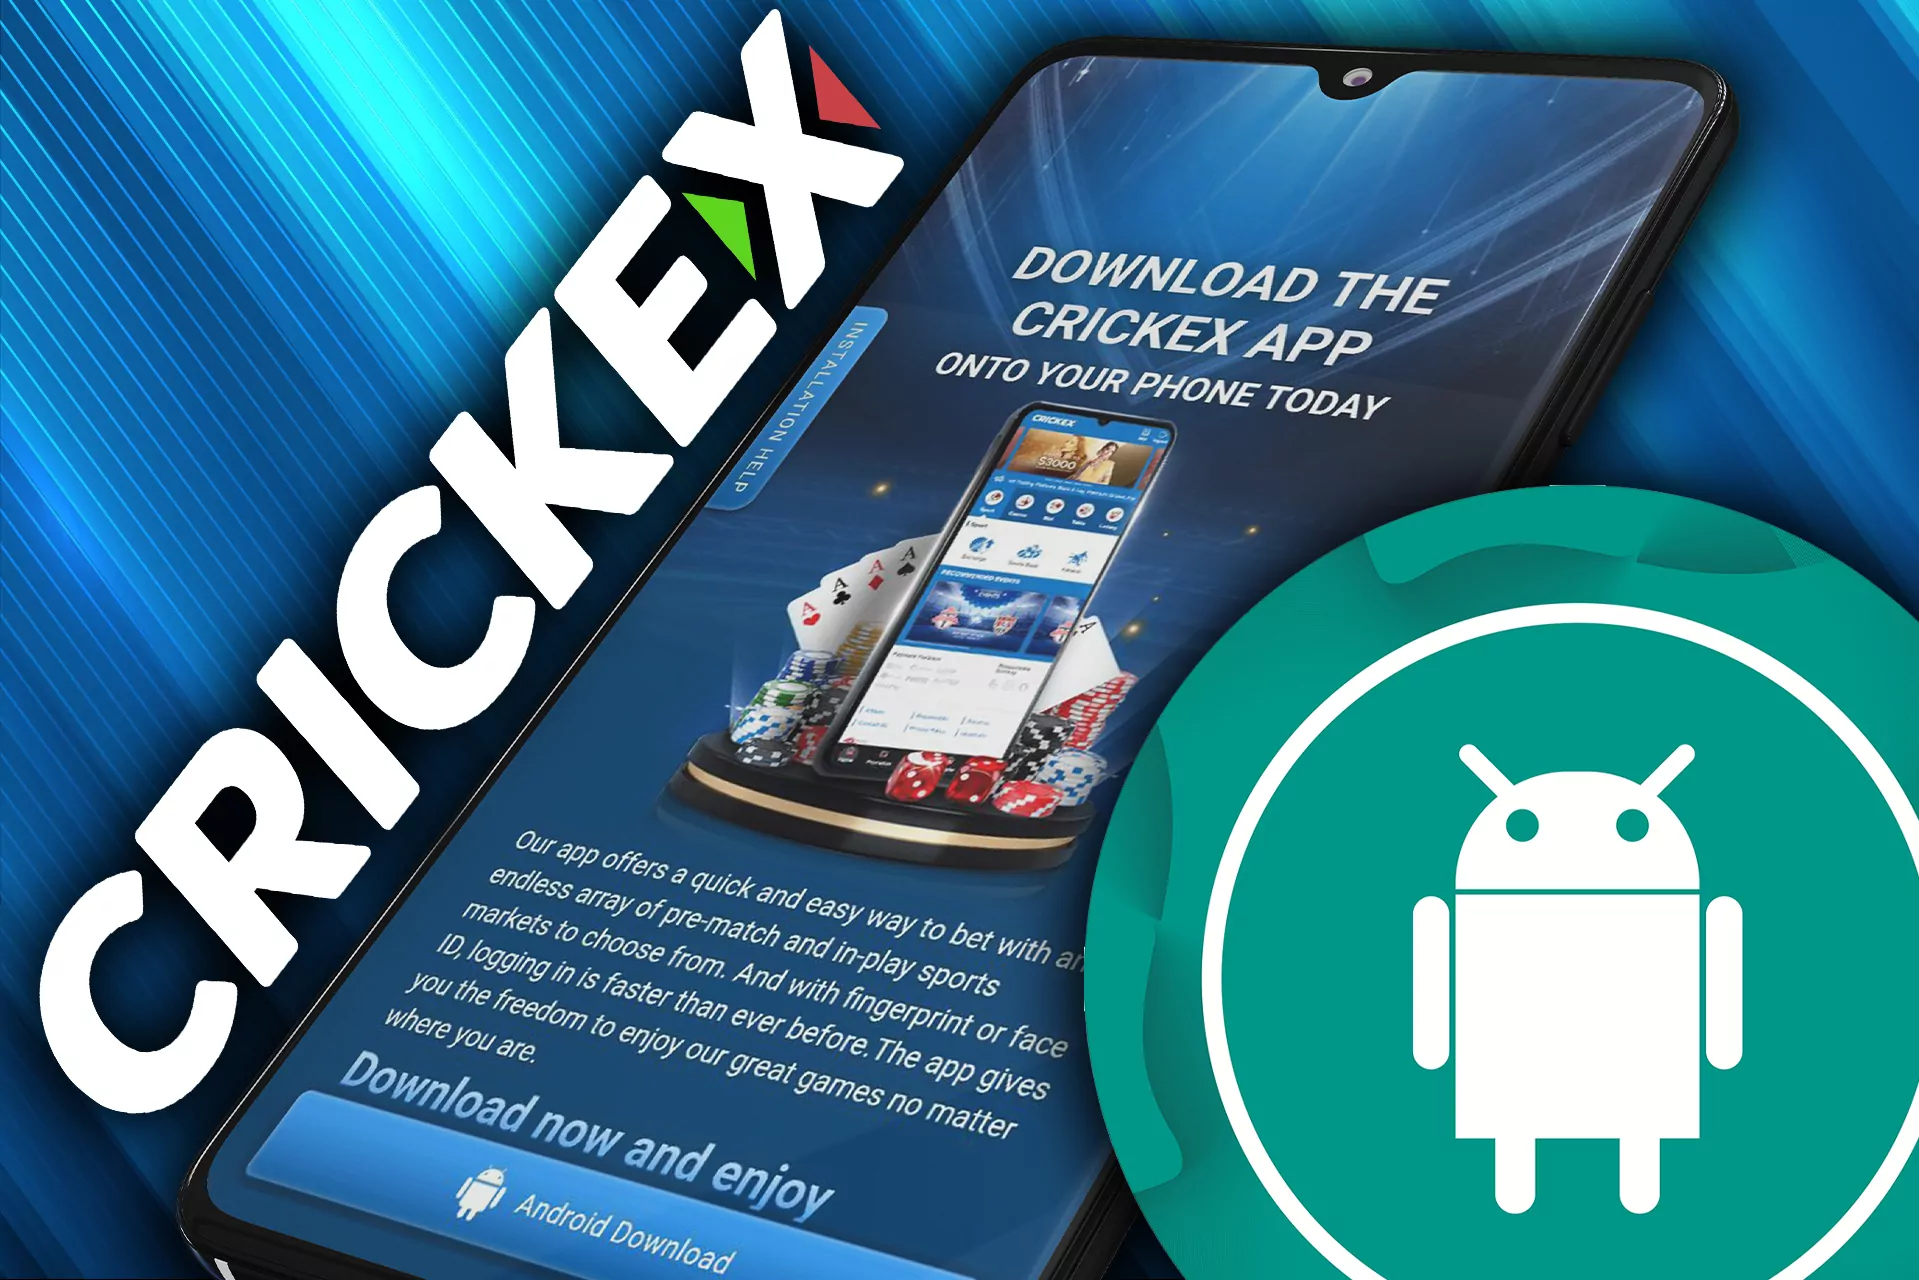 Crickex application can be easily installed on your Android smartphone.